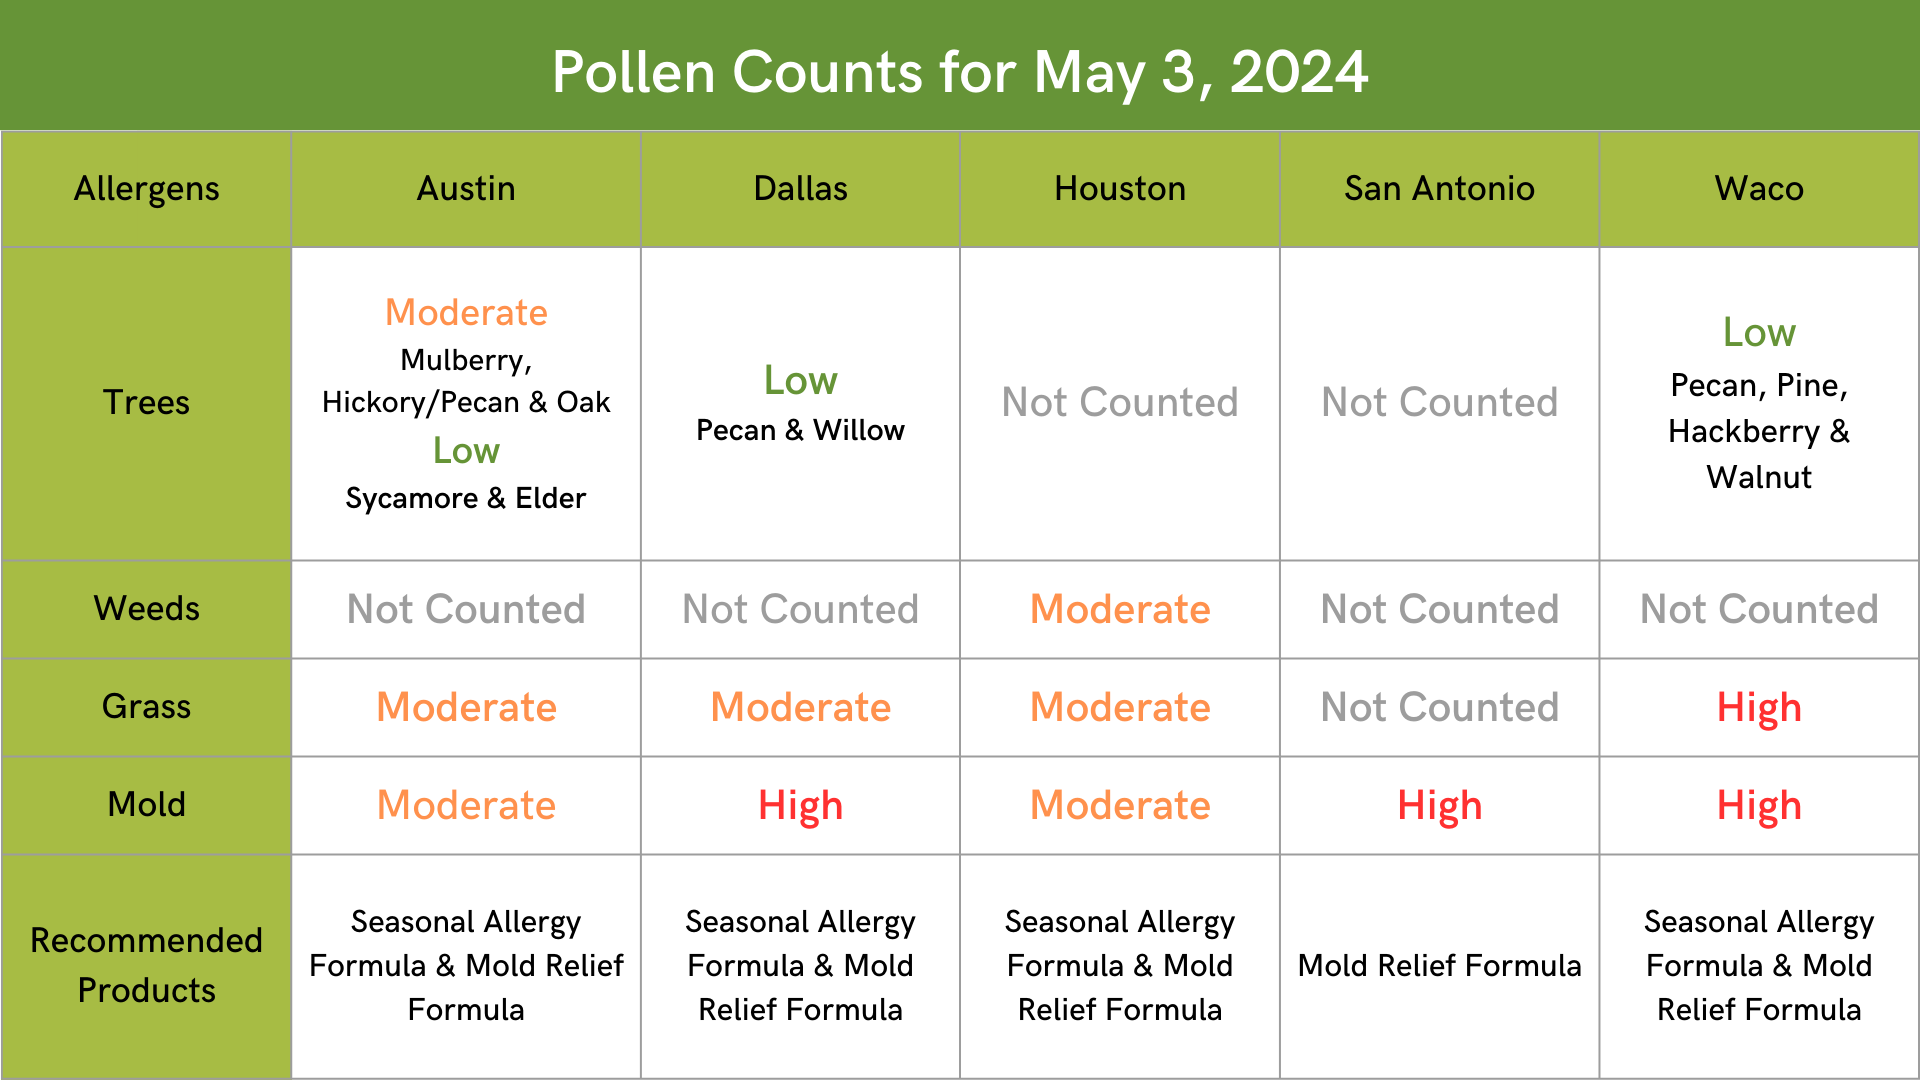 Texas Allergy Pollen Counts of Trees, Weeds, Grass and Mold in Austin, Dallas, Houston, San Antonio and Waco on May 3, 2024